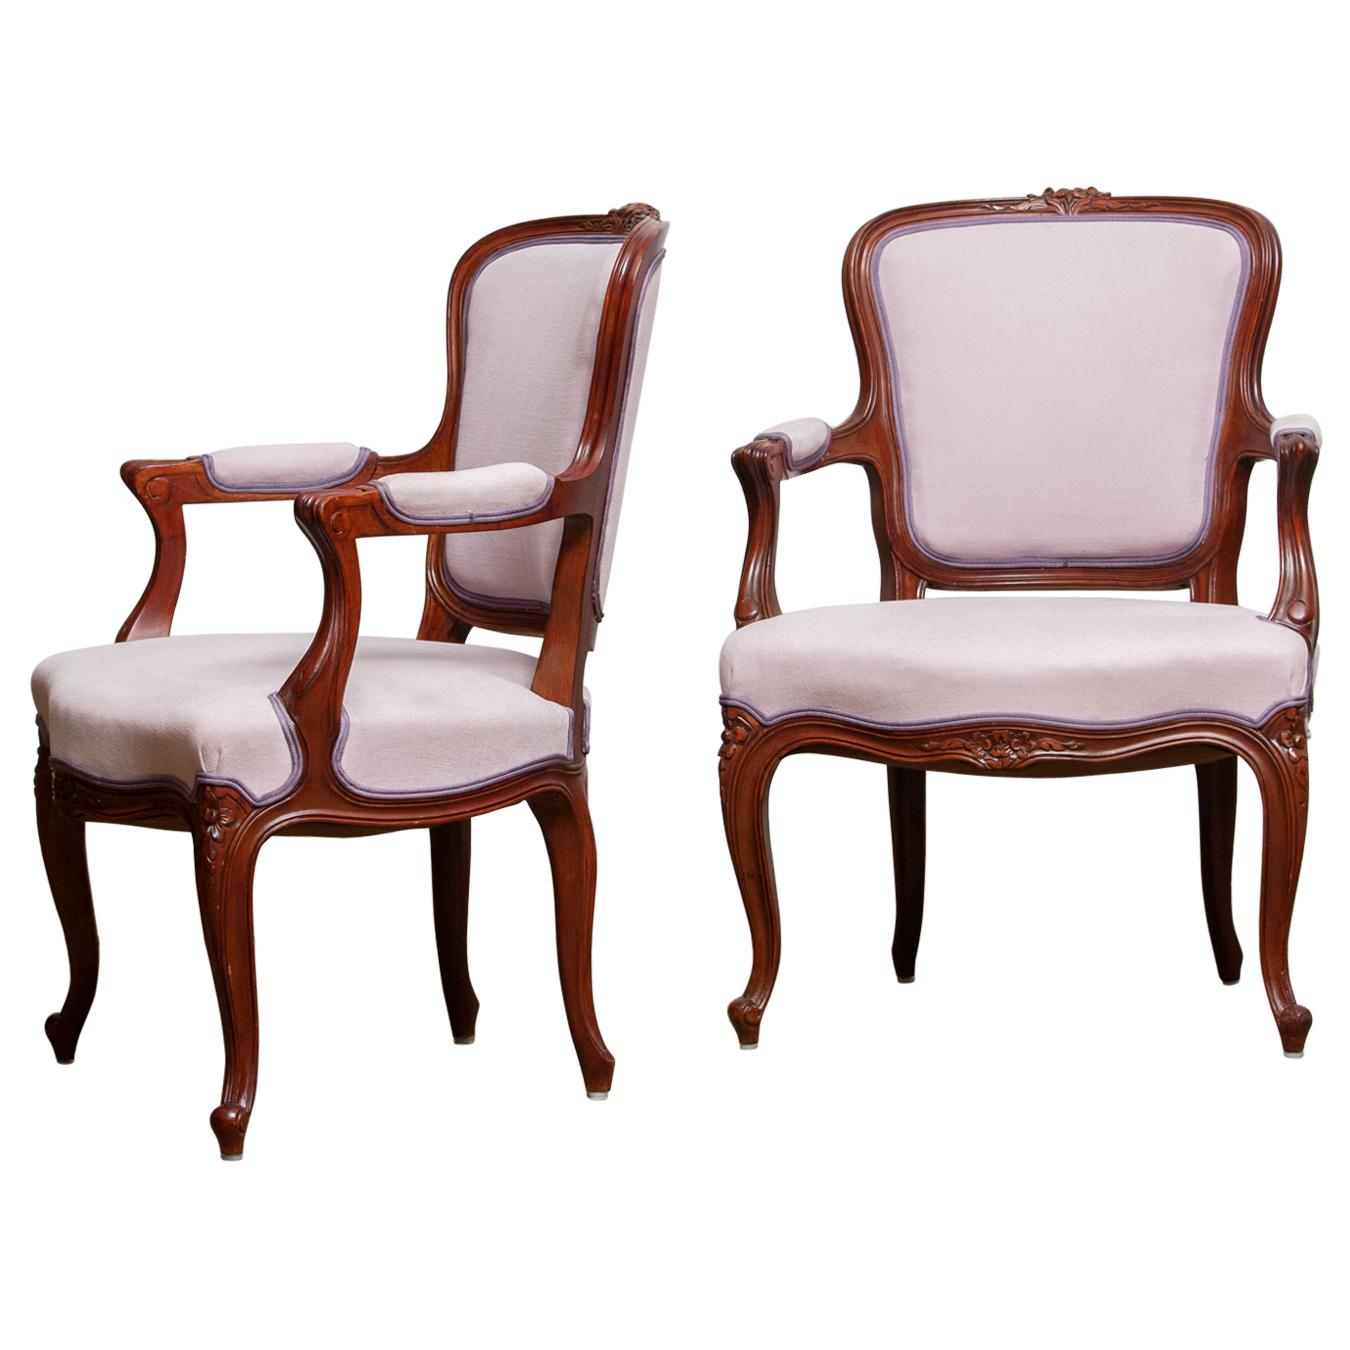 1950s, the Swedish Neo-Rococo, and finished in the shabby chic technique armchair is in perfect condition. Upholstered in pink fabric and two extra cushions for extra comfort also in pink jacquard. Measures: Seat height with the extra cushion is: